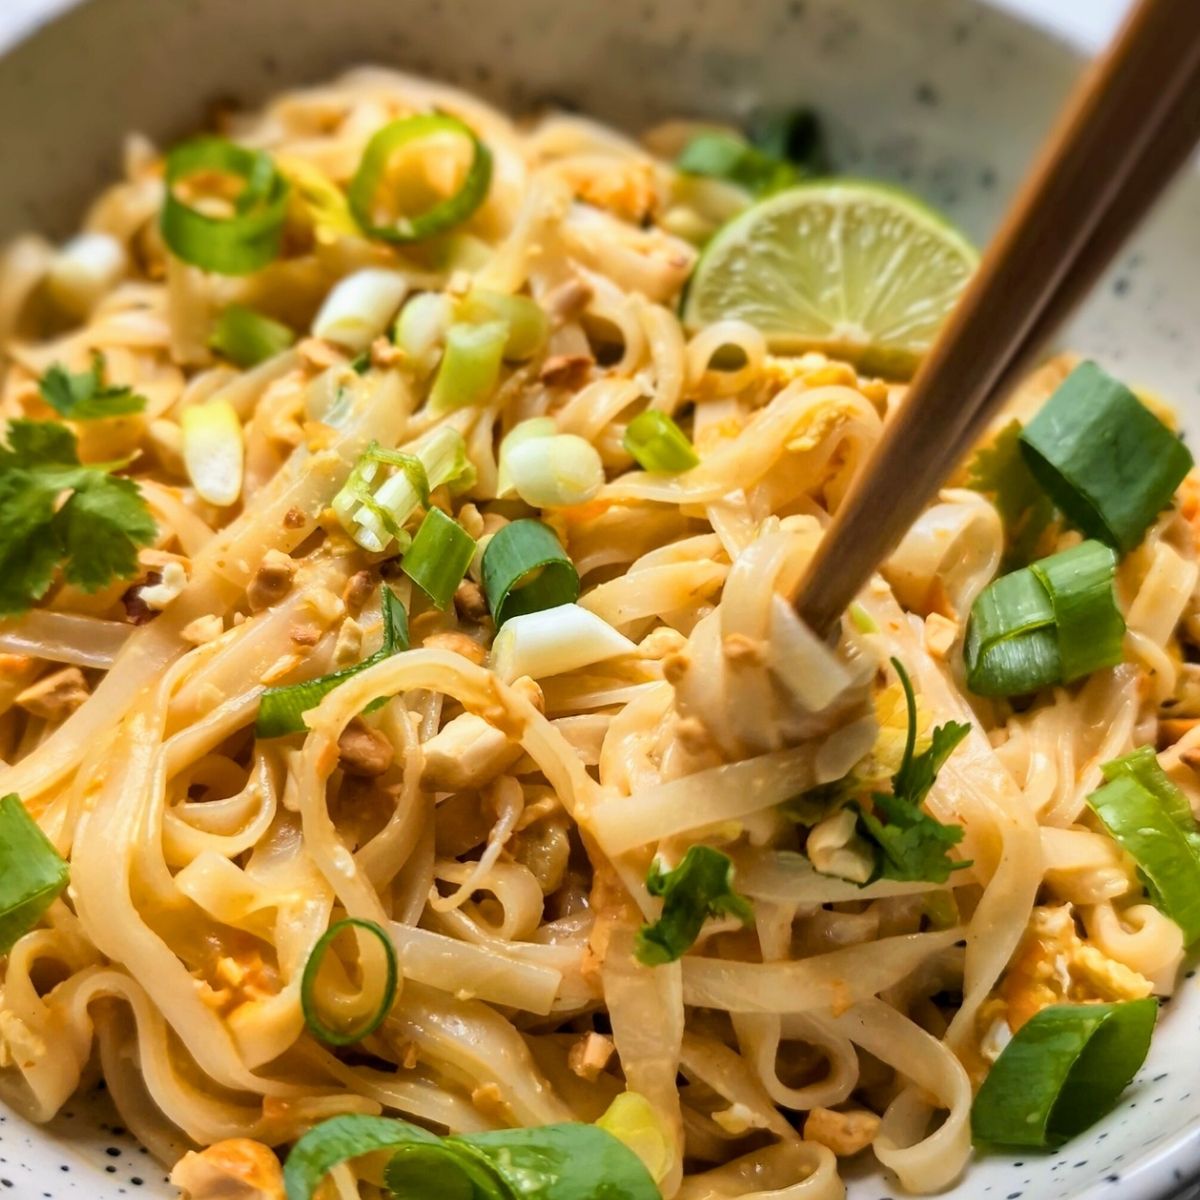 chopsticks twirling a large bundle of noodles dressed in a low sodium peanut sauce with unsalted peanuts and fresh limes